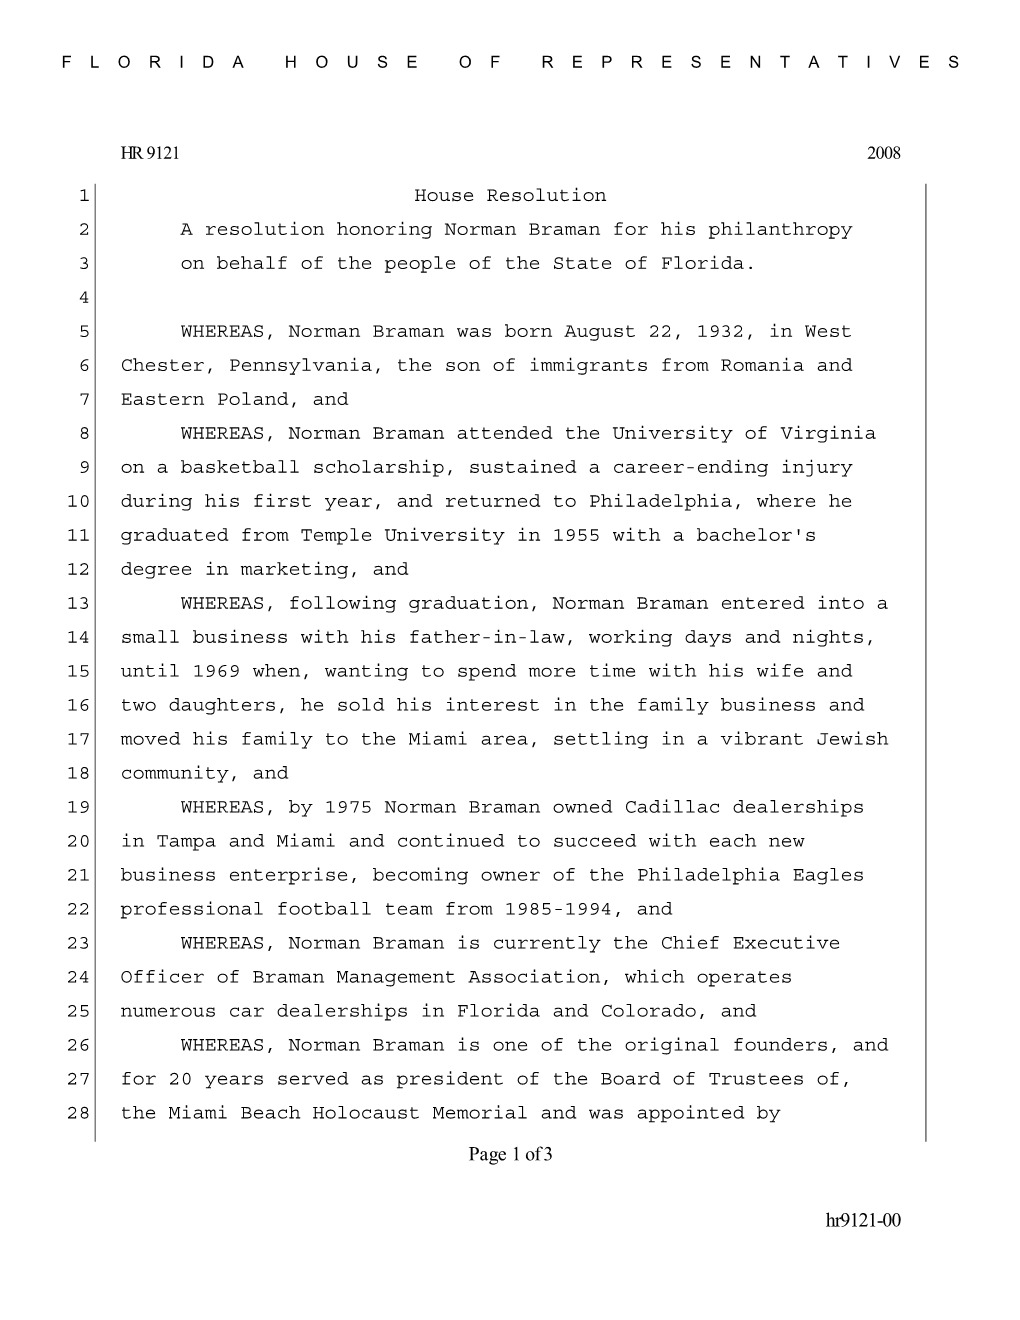 Hr9121-00 Page 1 of 3 House Resolution 1 a Resolution Honoring Norman Braman for His Philanthropy 2 on Behalf of the People of T